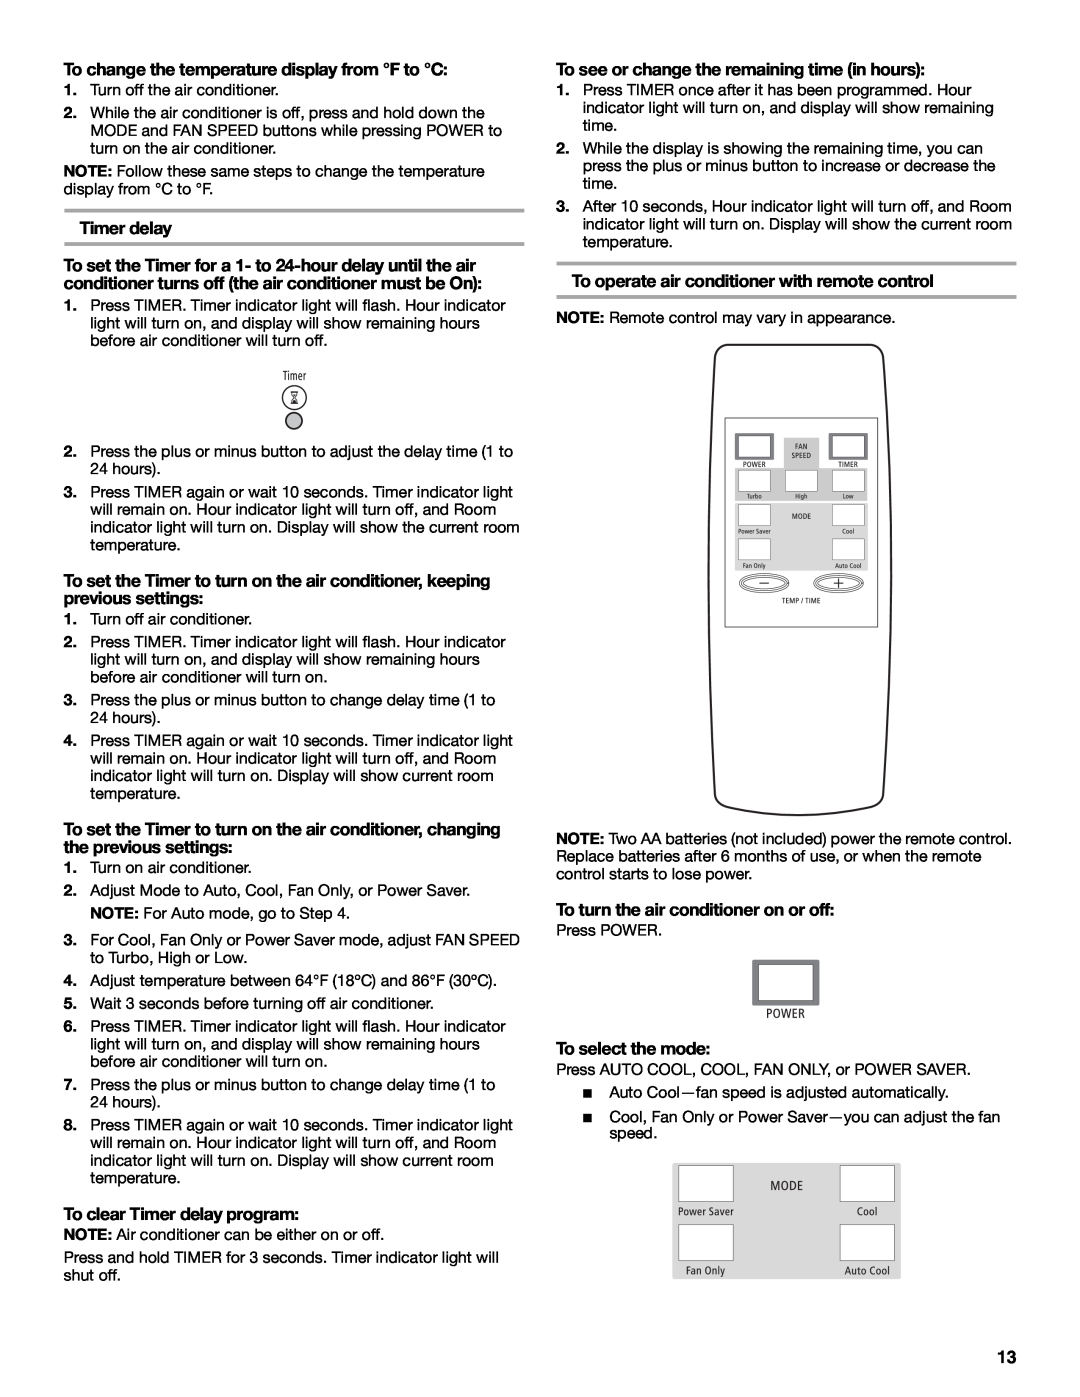 Whirlpool ACE184XR0 To change the temperature display from F to C, To clear Timer delay program, To select the mode 